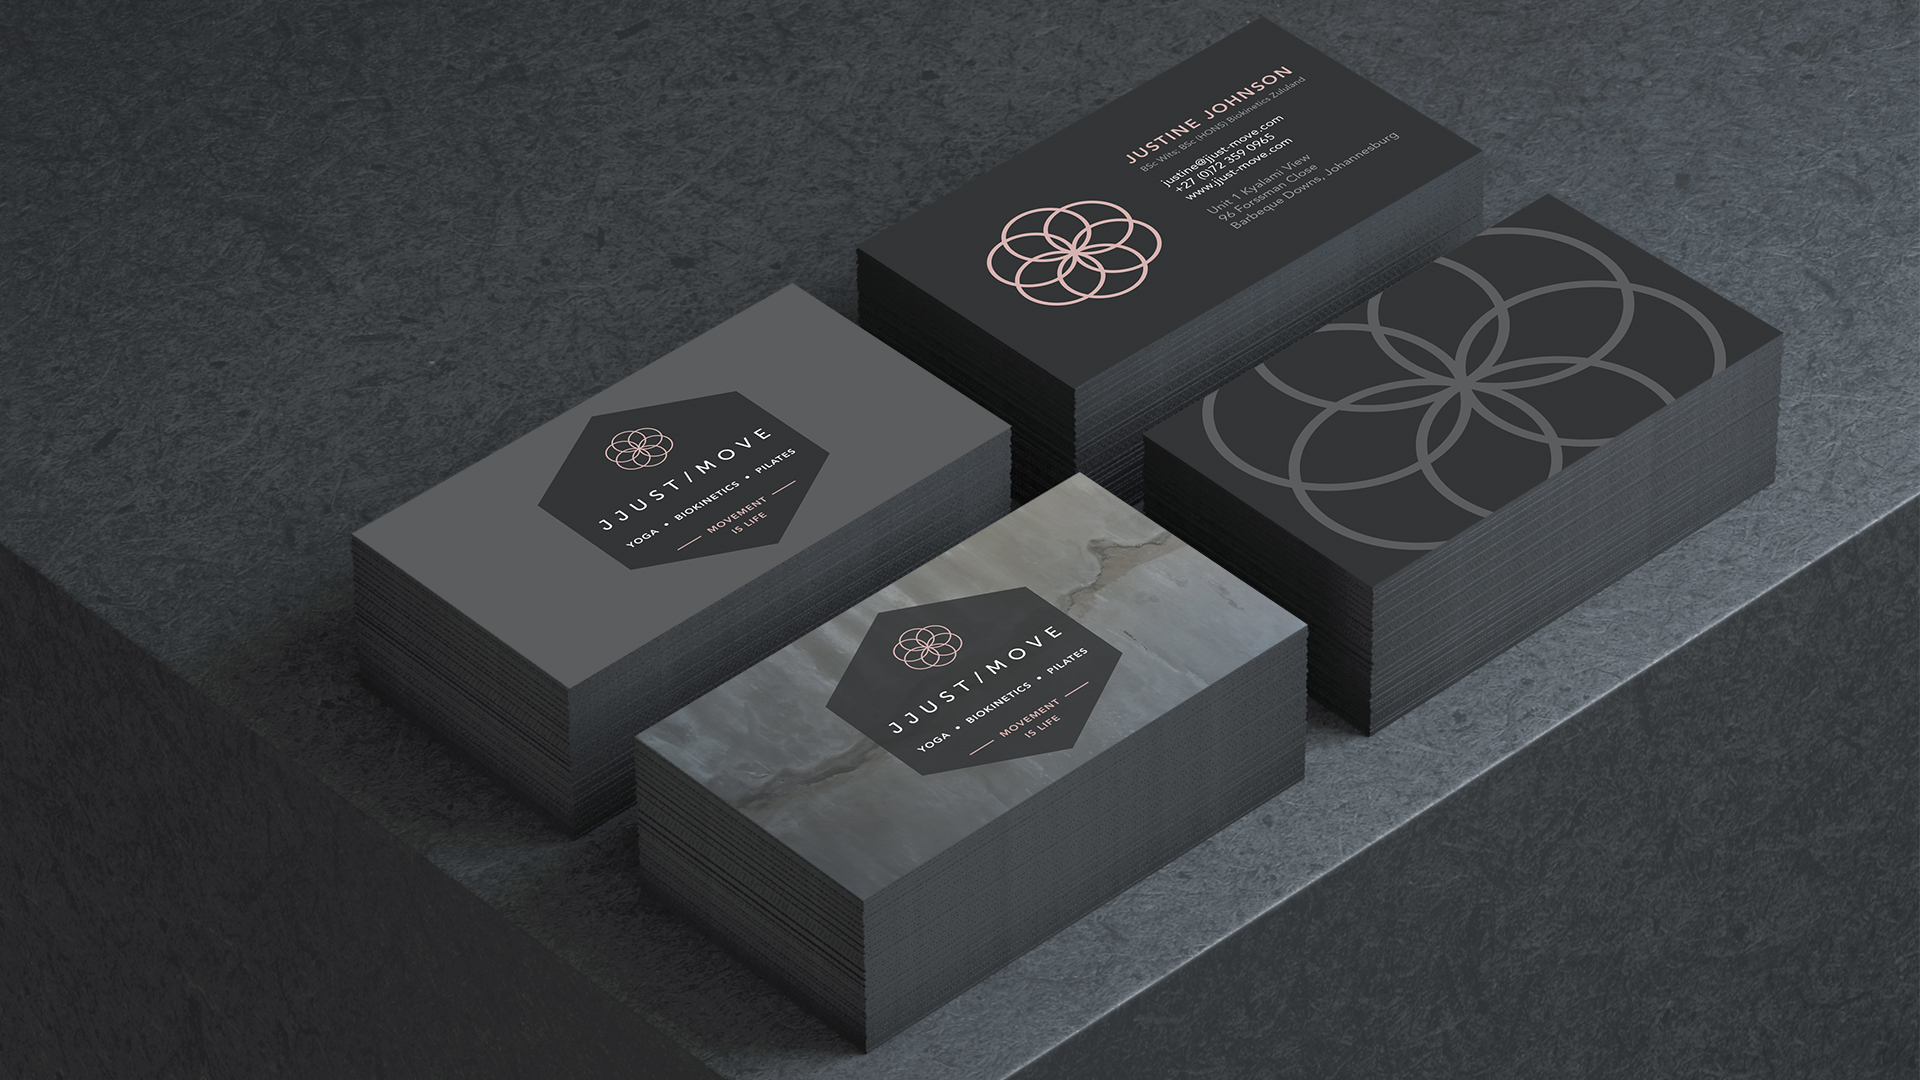 JJust Move business cards designed by MR.SMiTH Creative Studio